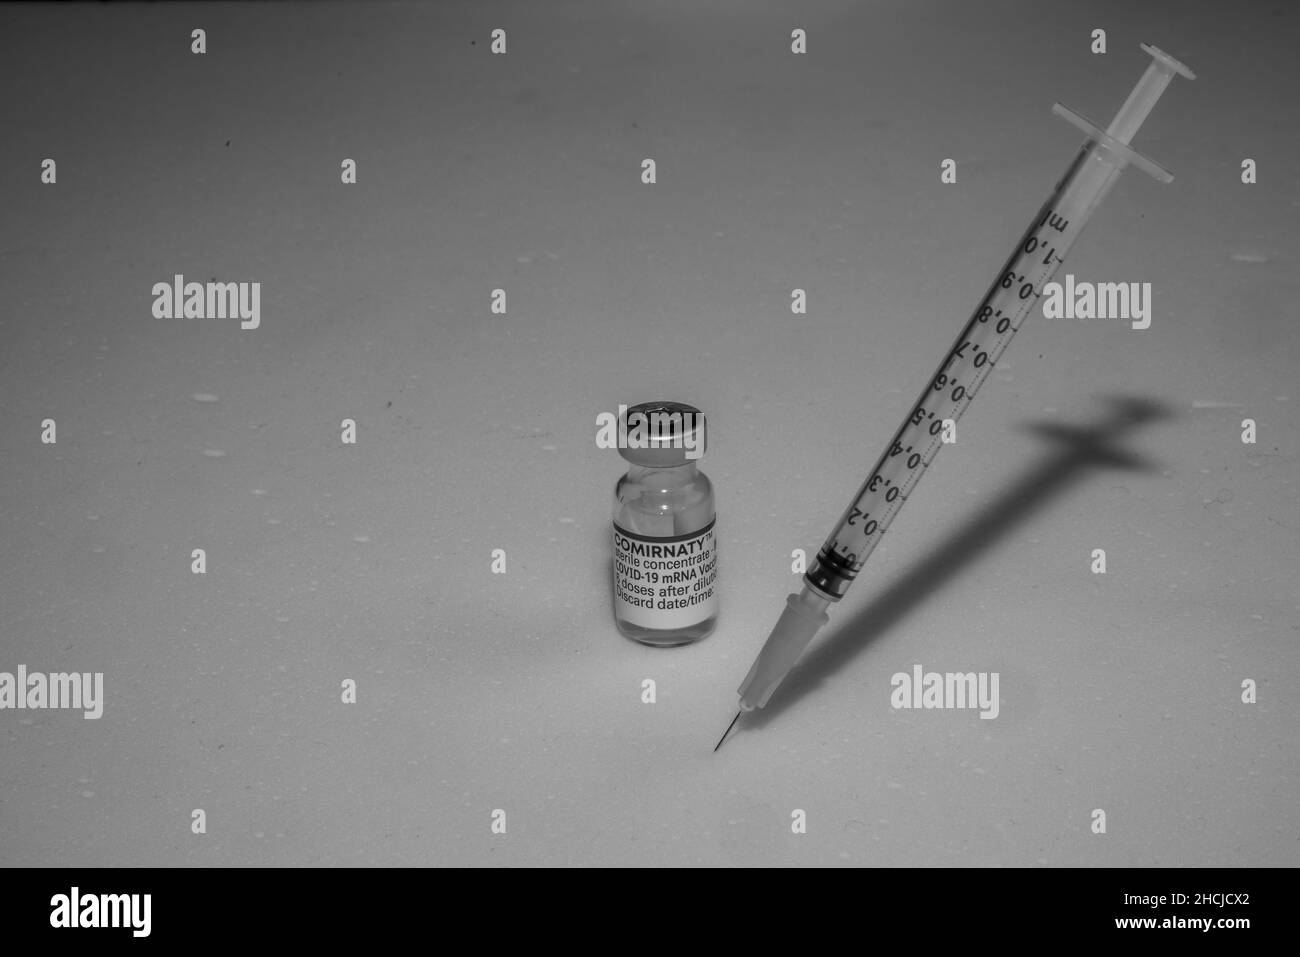 Bamberg, Germany - 16.11.2021. Vial of vaccine from Biontech-Pfizer Cormirnaty and a vaccination syringe against a white background Stock Photo